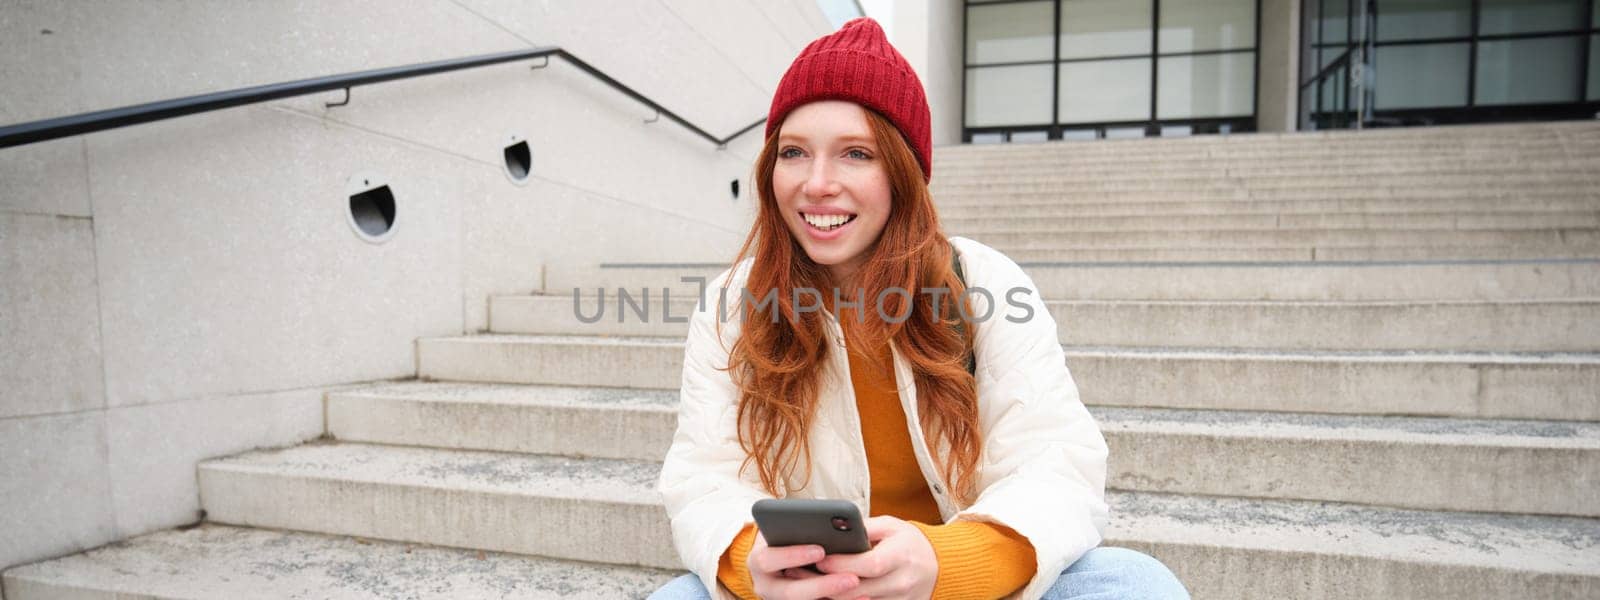 Redhead girl in red hat, sits on stairs and uses mobile phone. Modern woman holding smartphone, texting message, using telephone application outdoors.